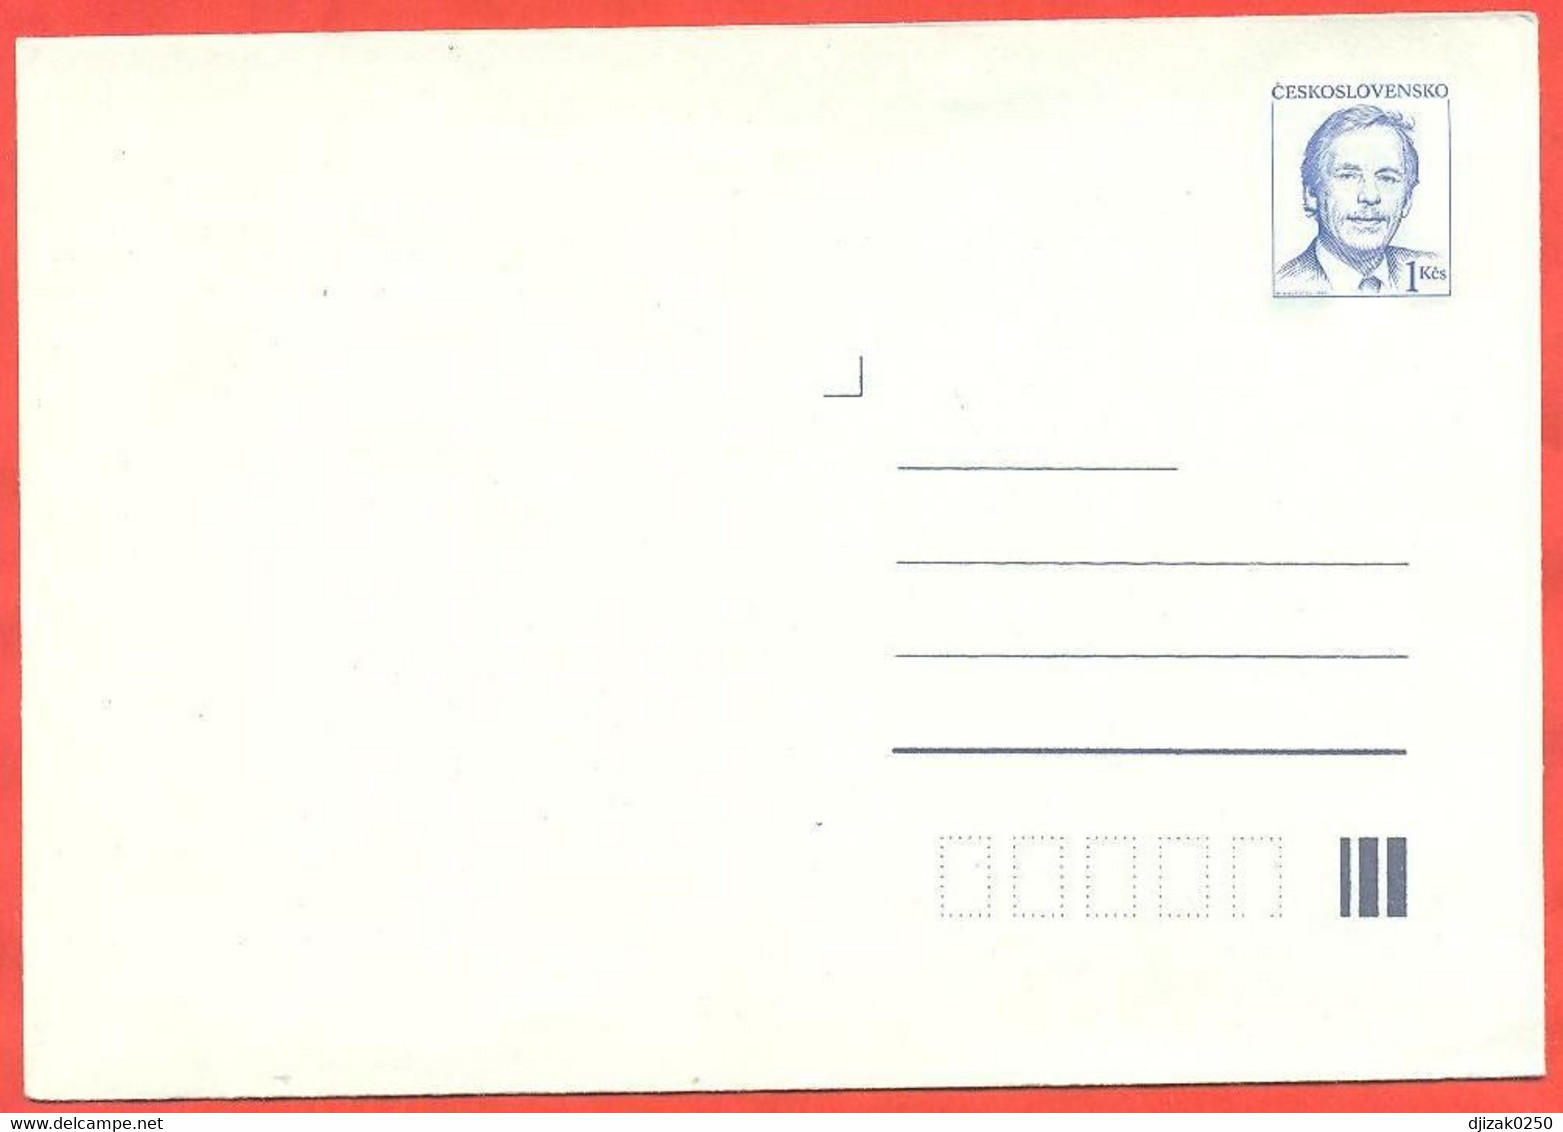 Czechoslovakia 1990. The Envelope With Printed Stamp. Unused. - Sobres